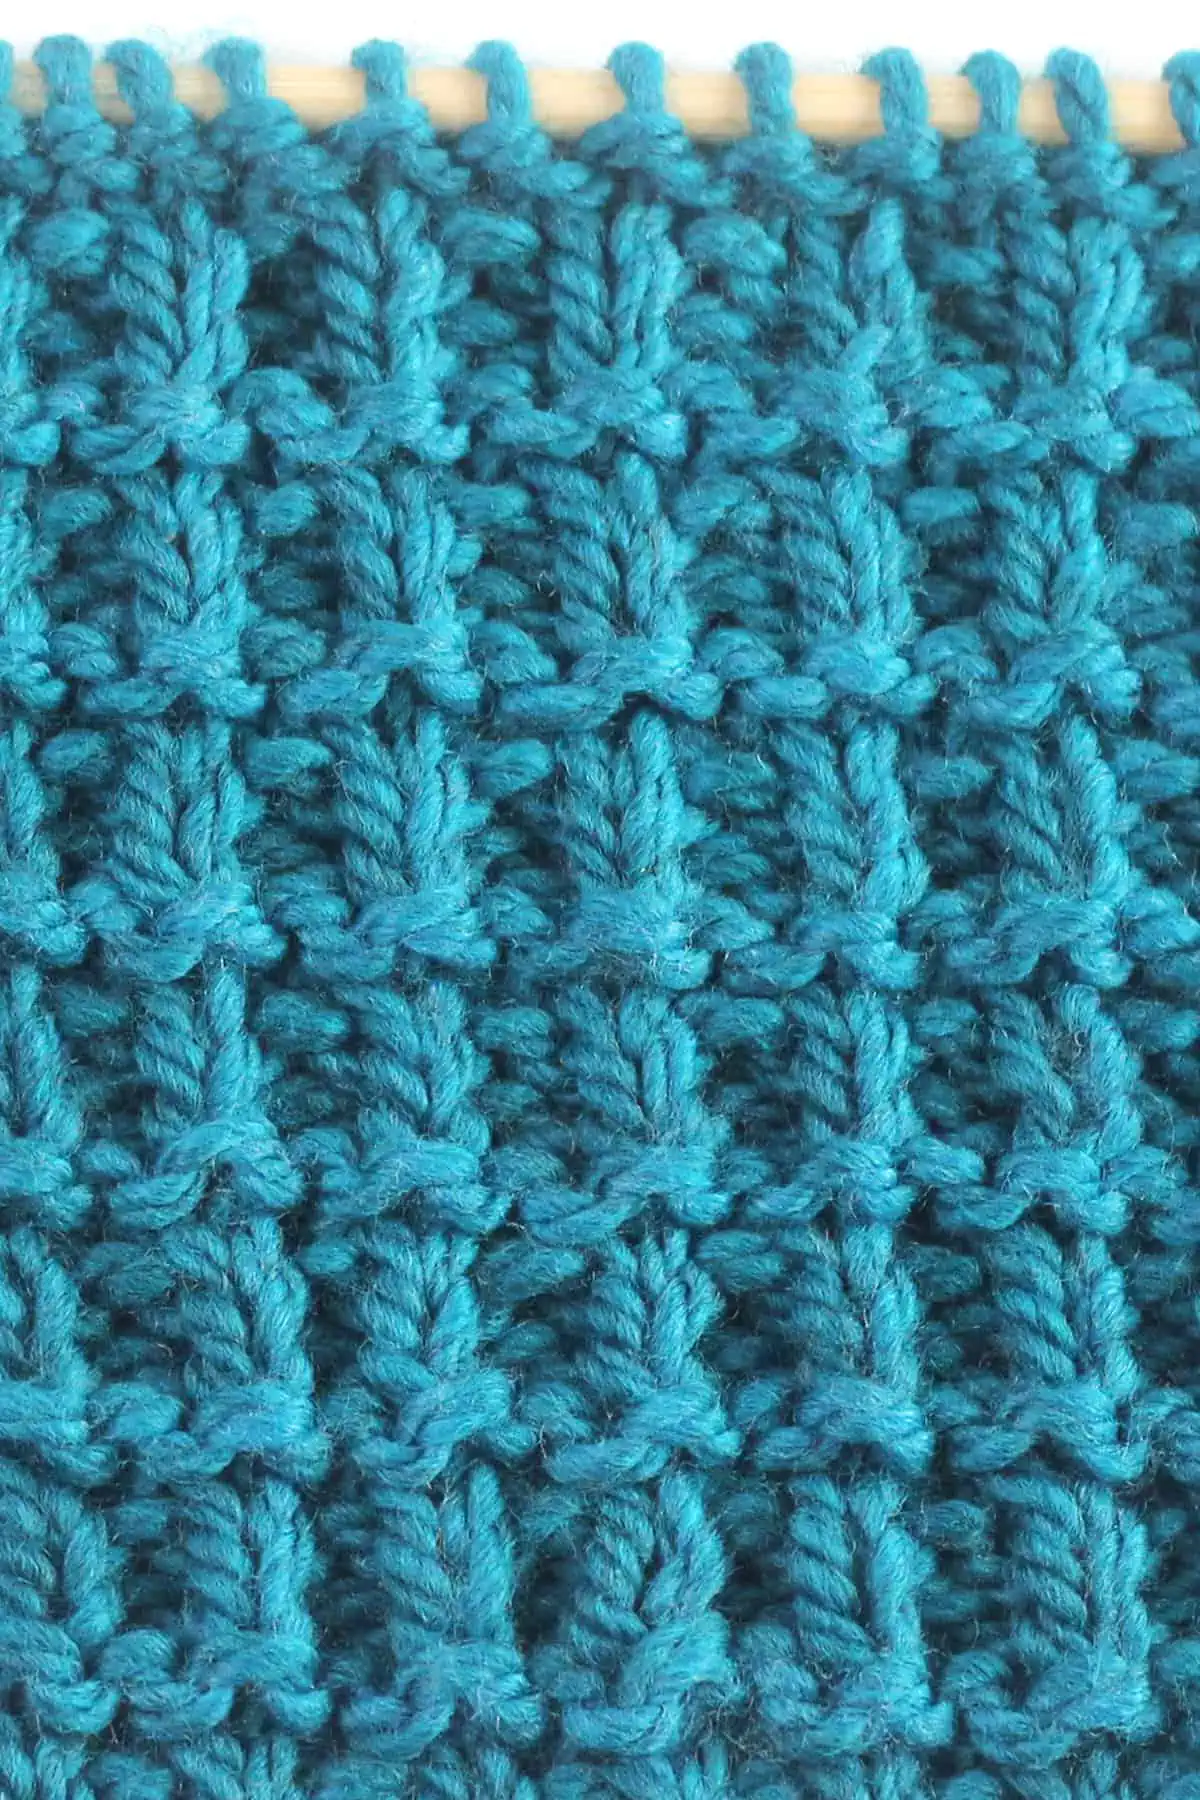 Hurdle stitch texture knitted with blue colored yarn on wooden needle.